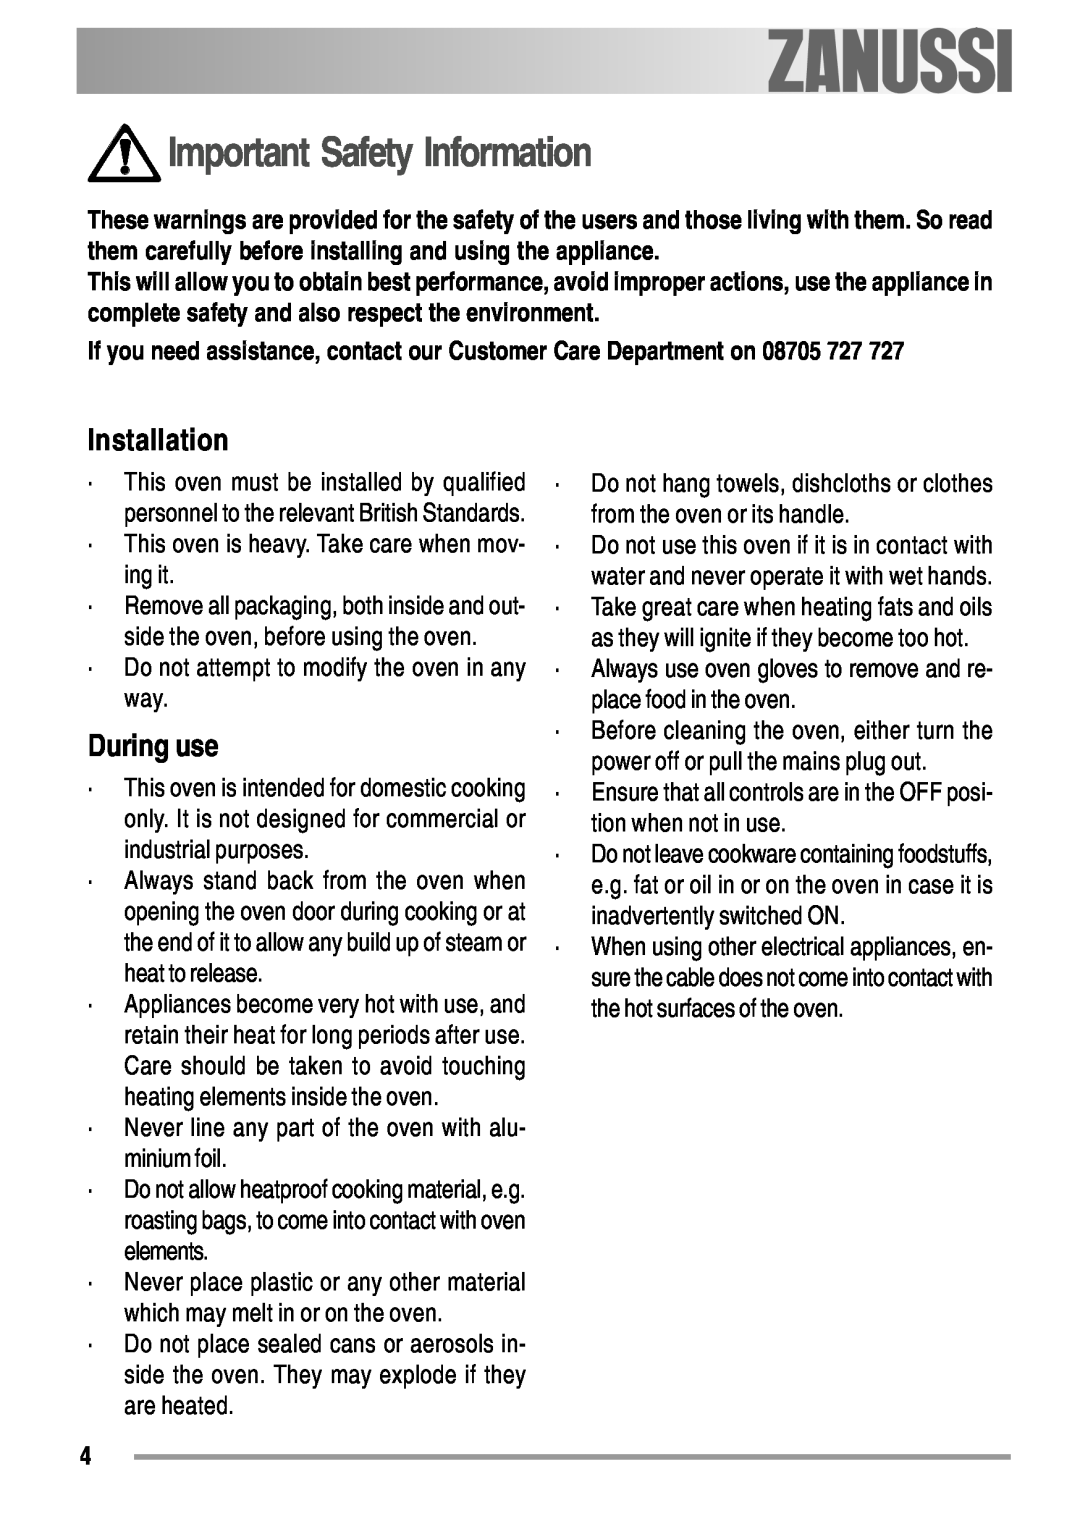 Zanussi ZYB 594 manual Important Safety Information, Installation, During use 